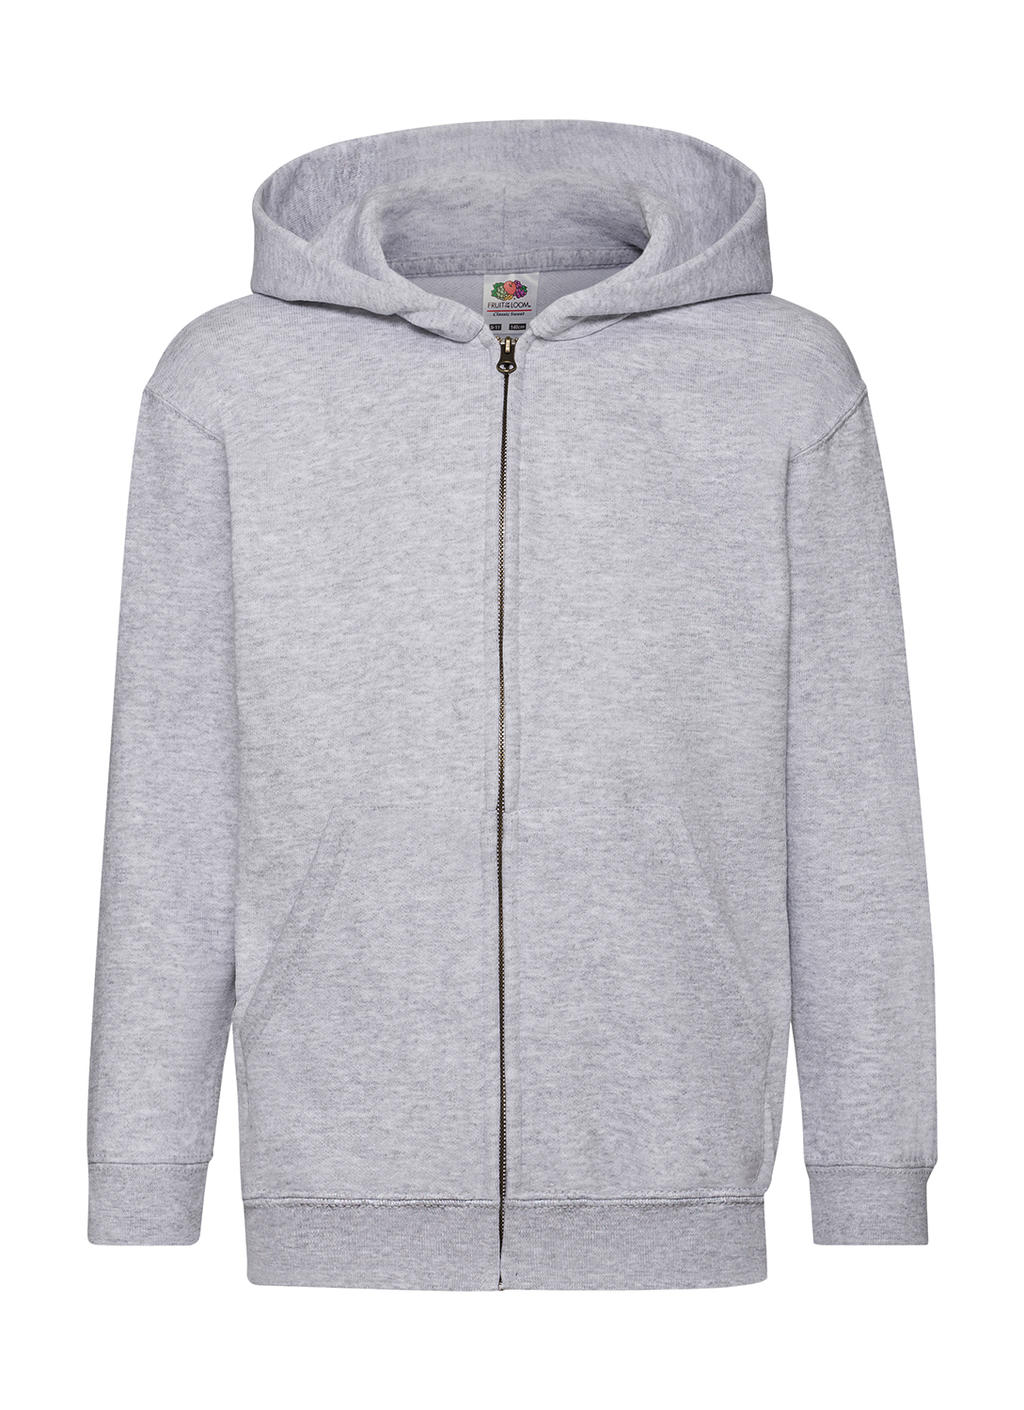  Kids Classic Hooded Sweat Jacket in Farbe Heather Grey